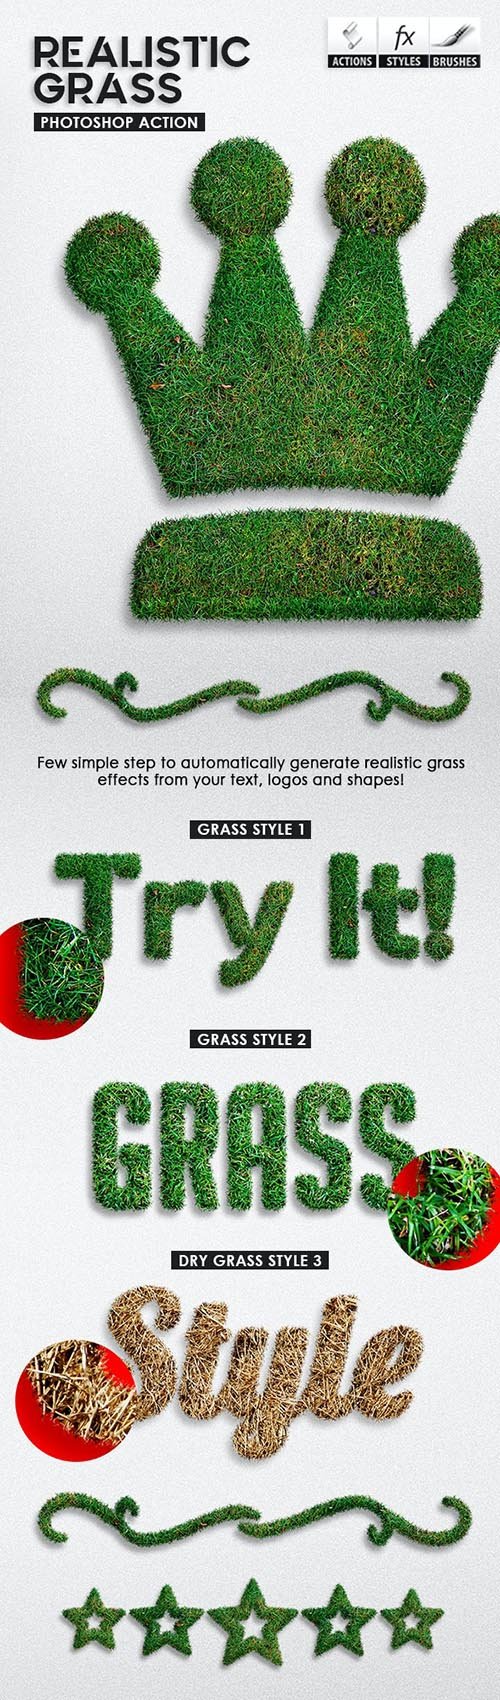 Realistic Grass - Photoshop Actions 28288665